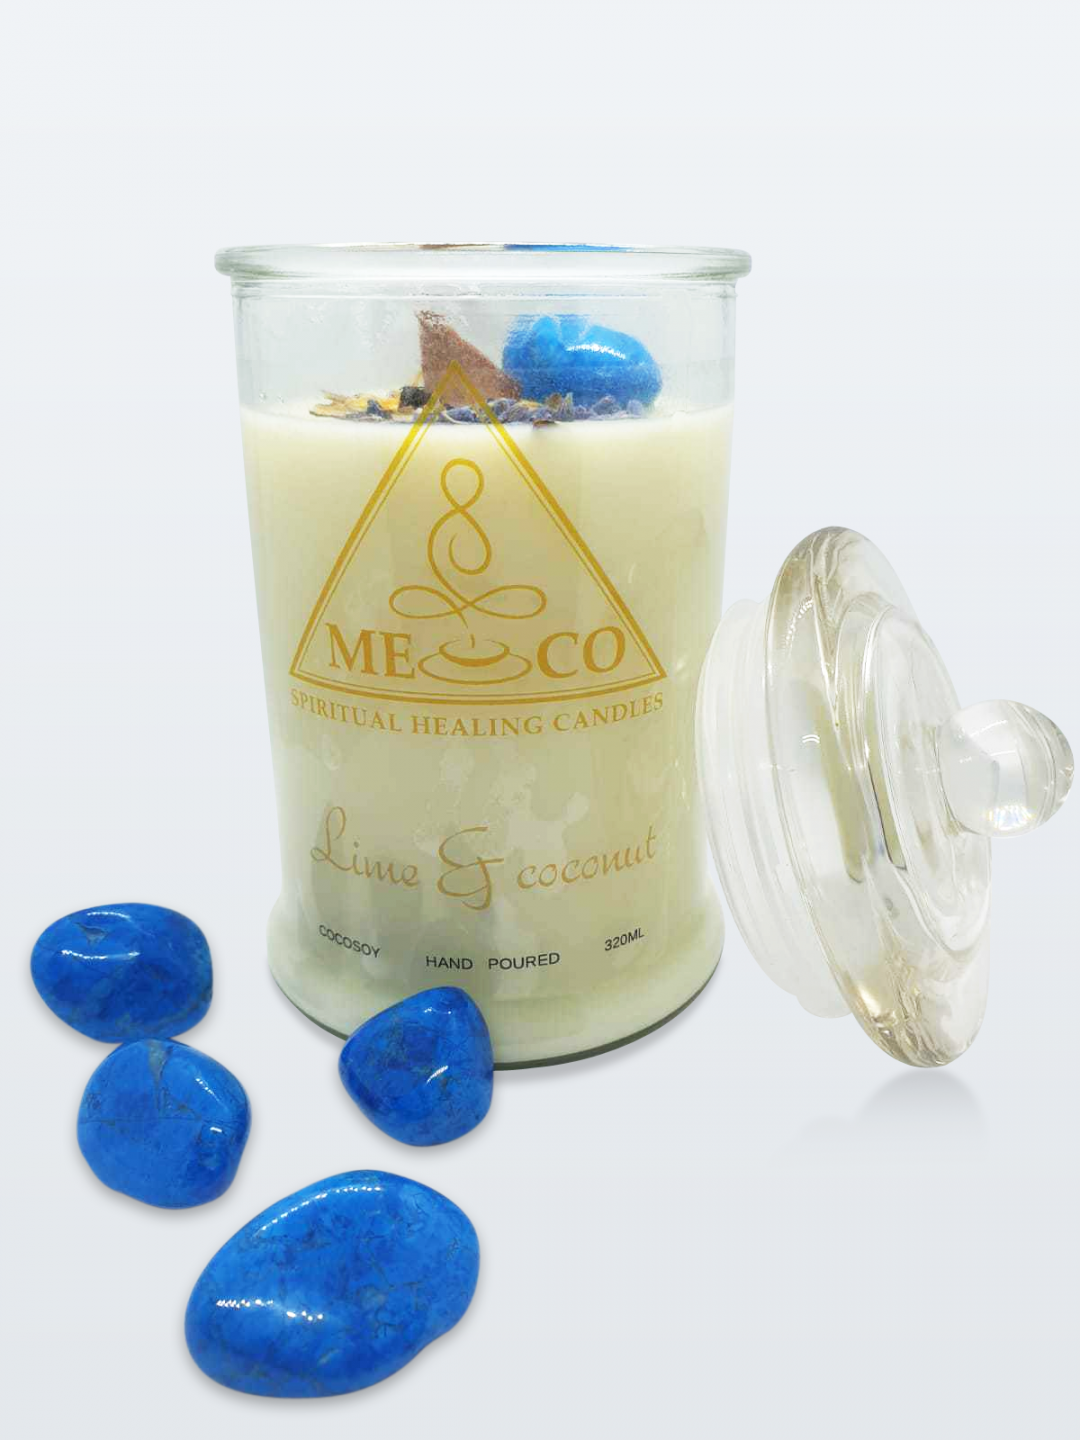 MECO Lime & Coconut Candle